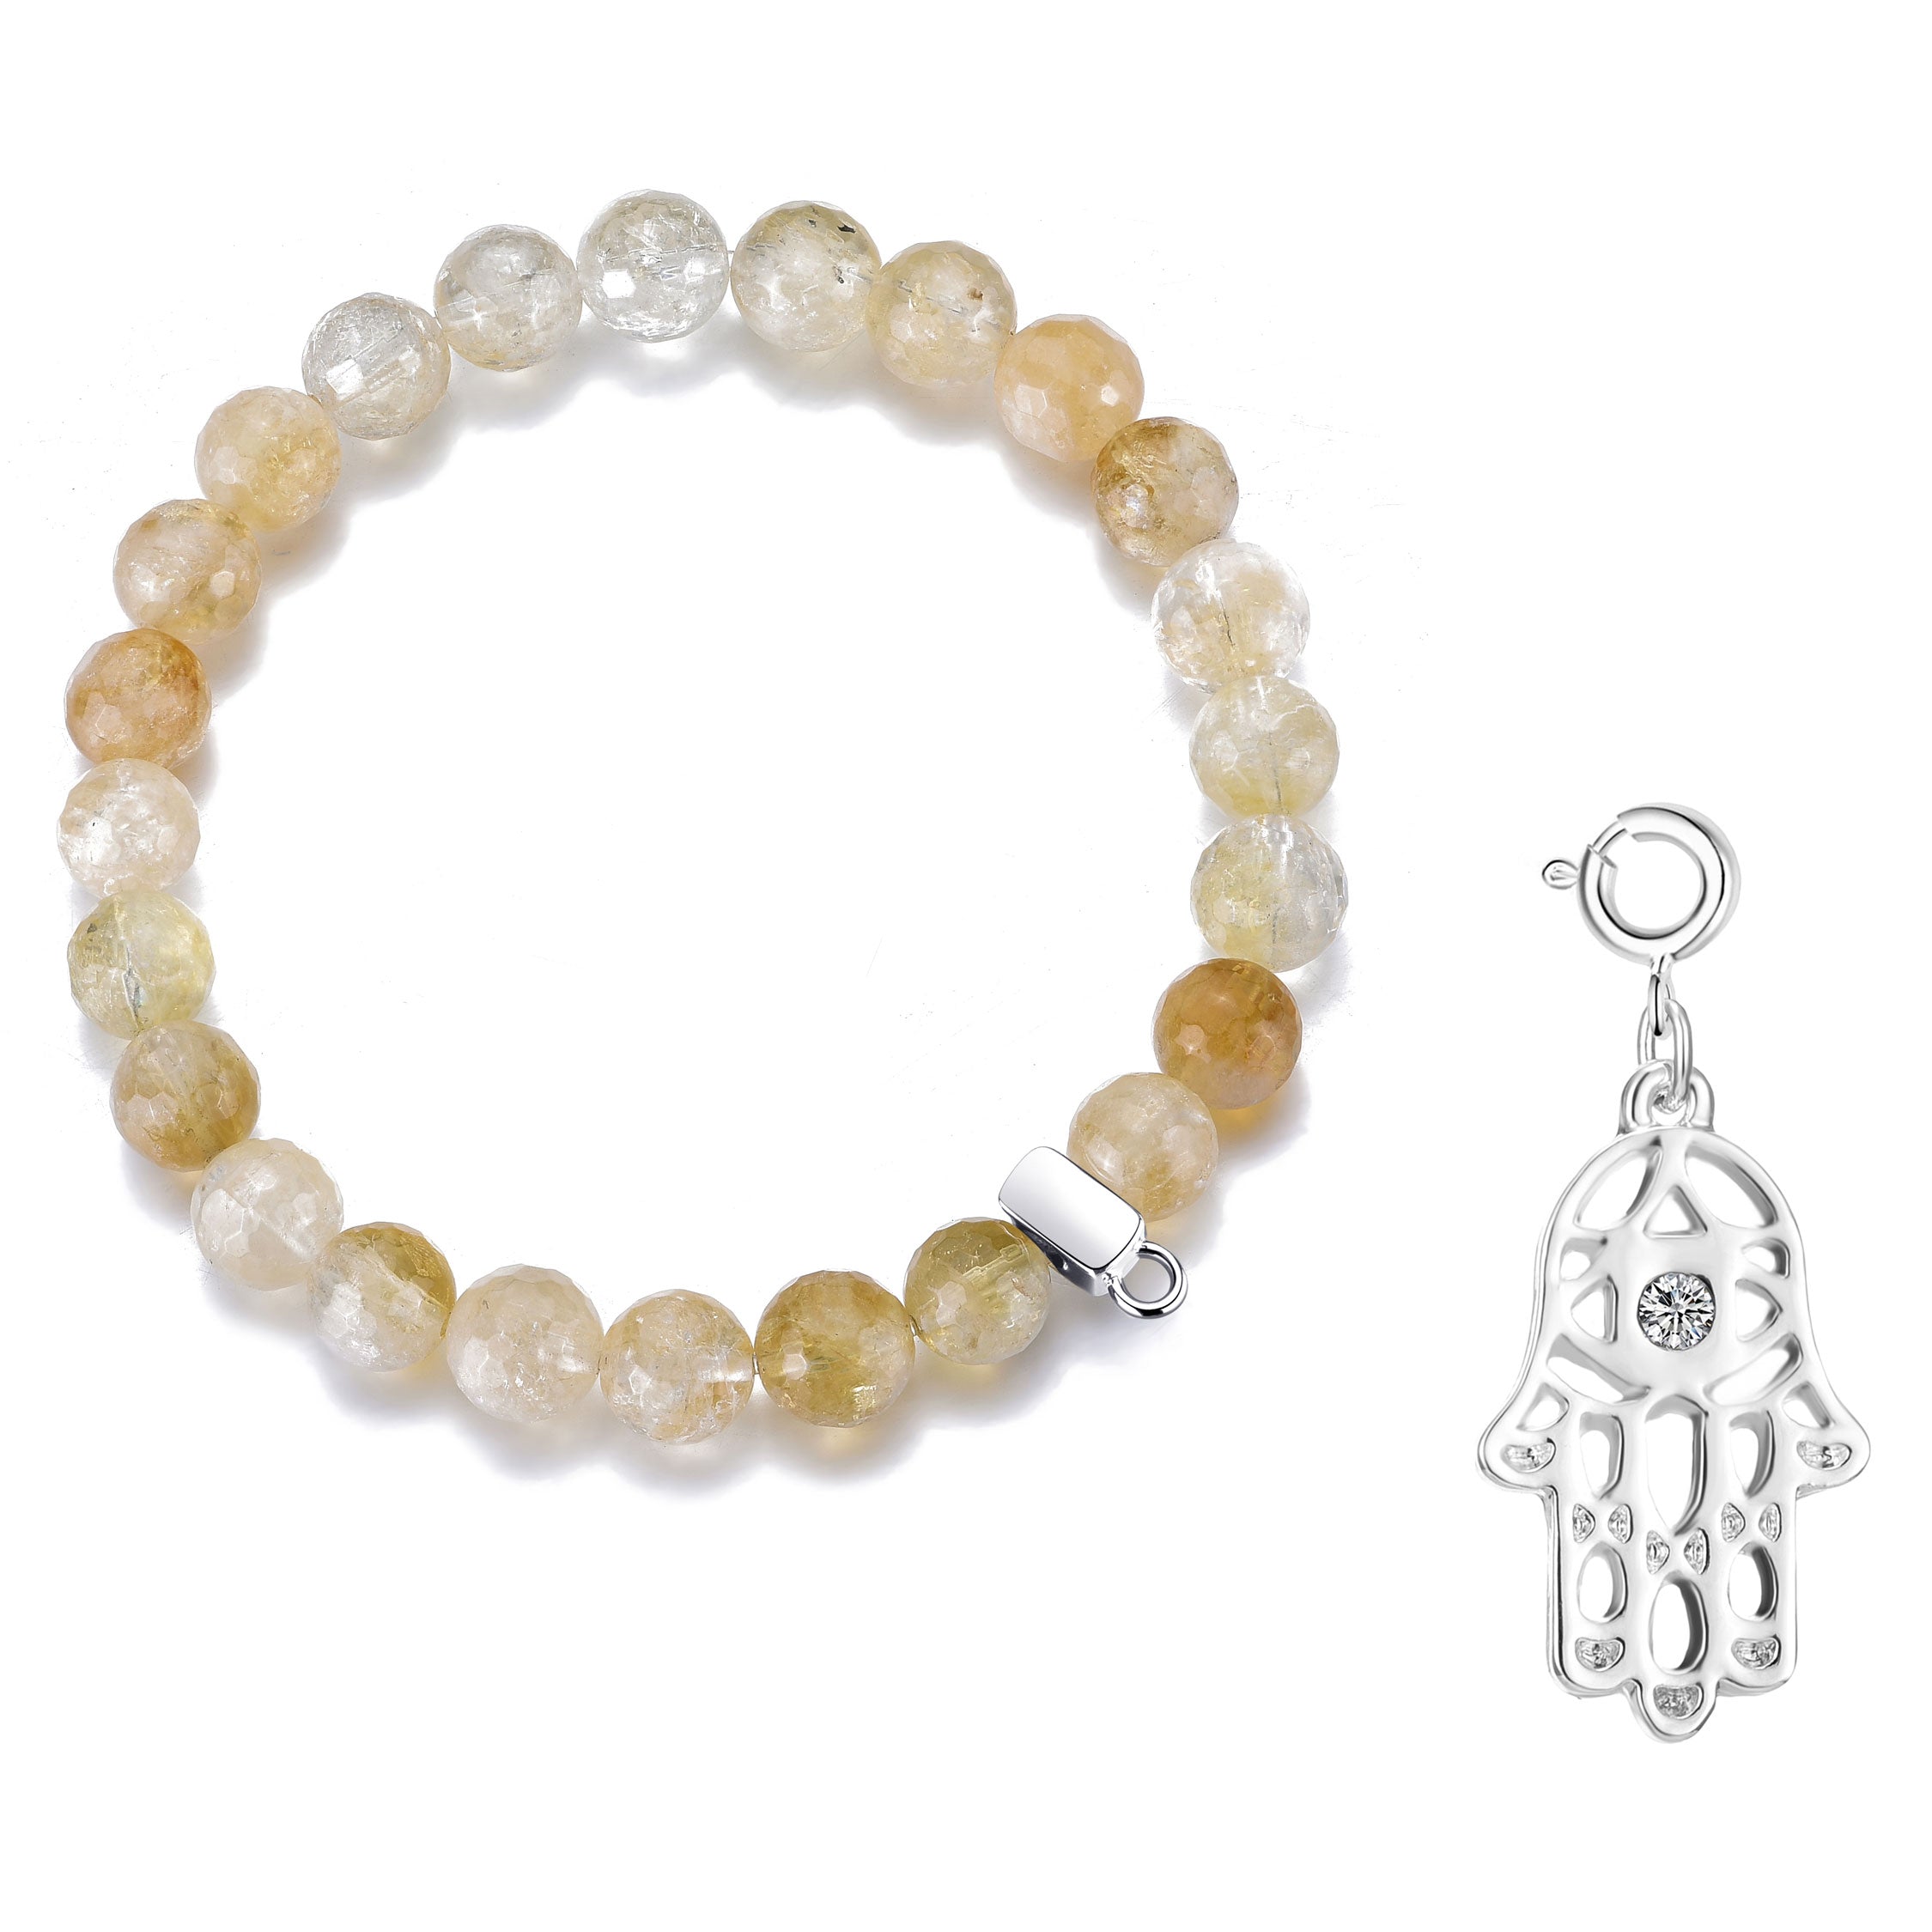 Faceted Yellow Quartz Gemstone Bracelet with Charm Created with Zircondia® Crystals